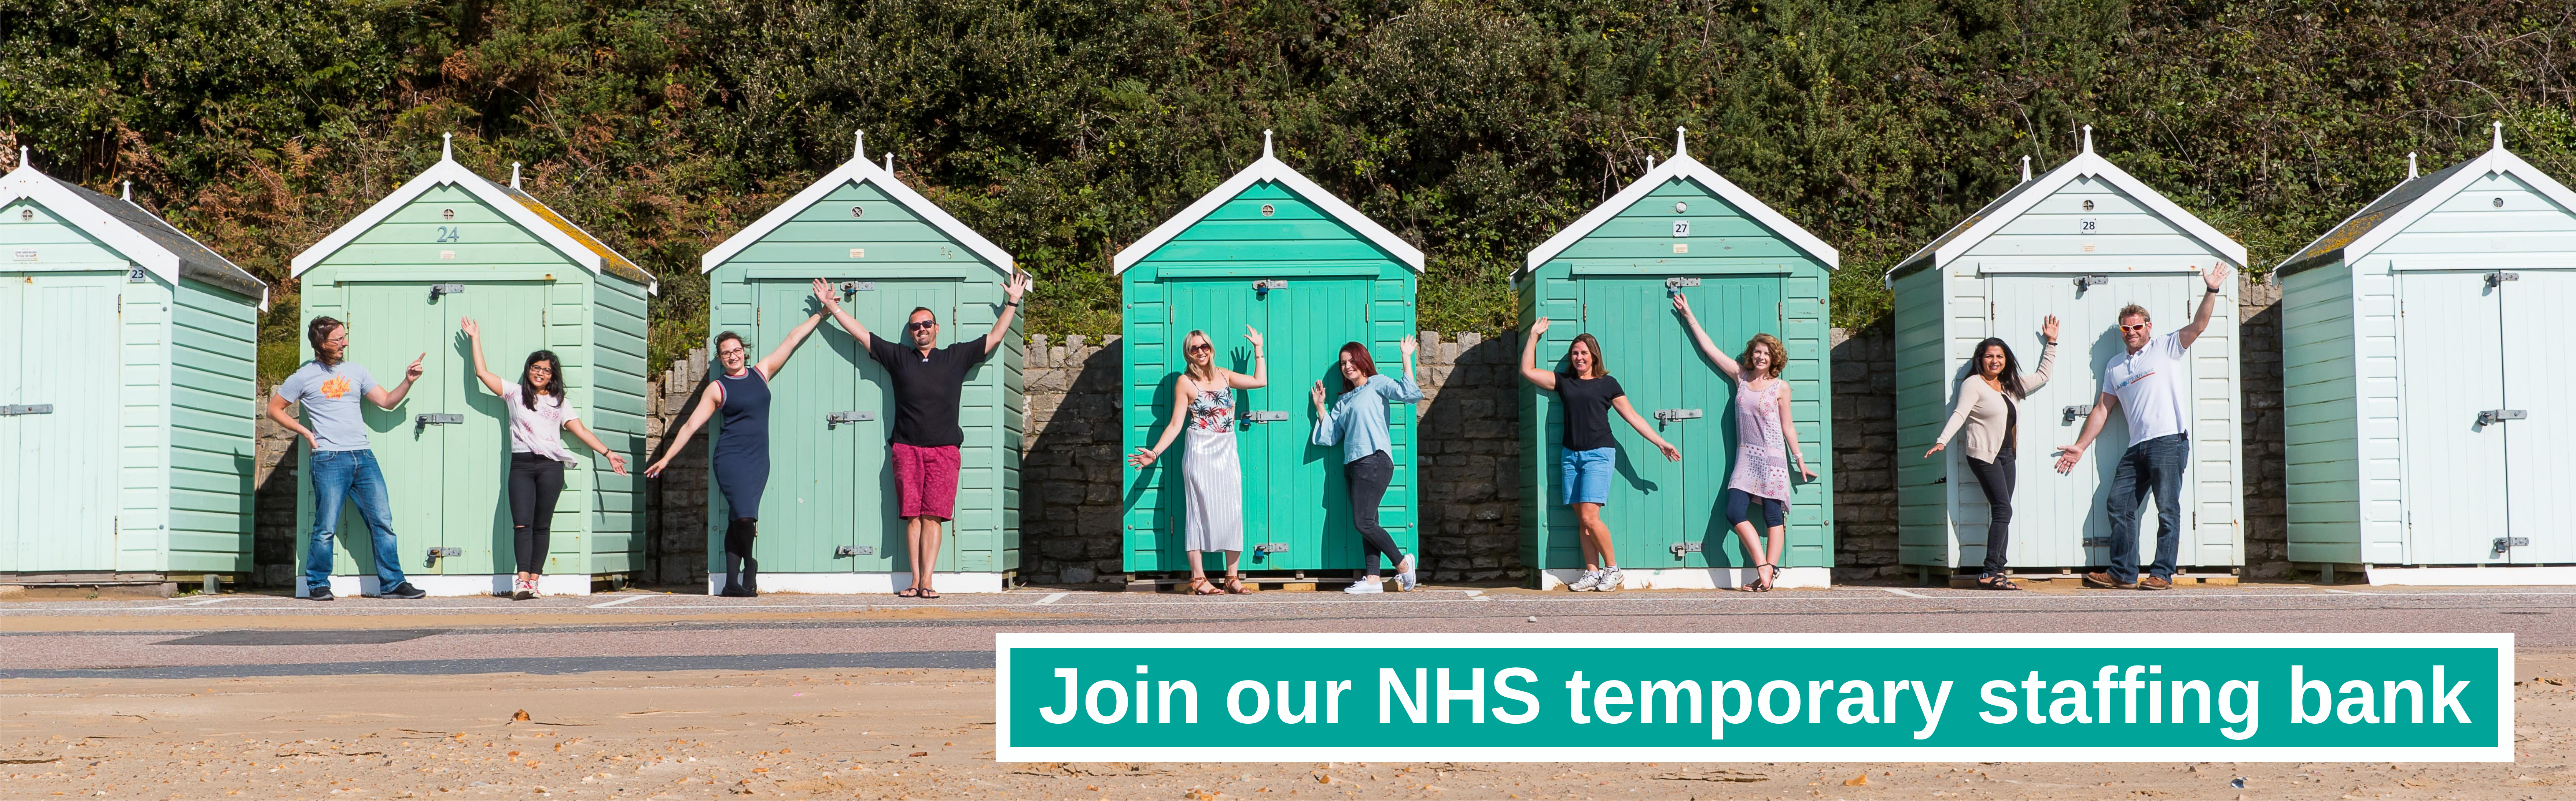 Join our NHS temporary staffing bank